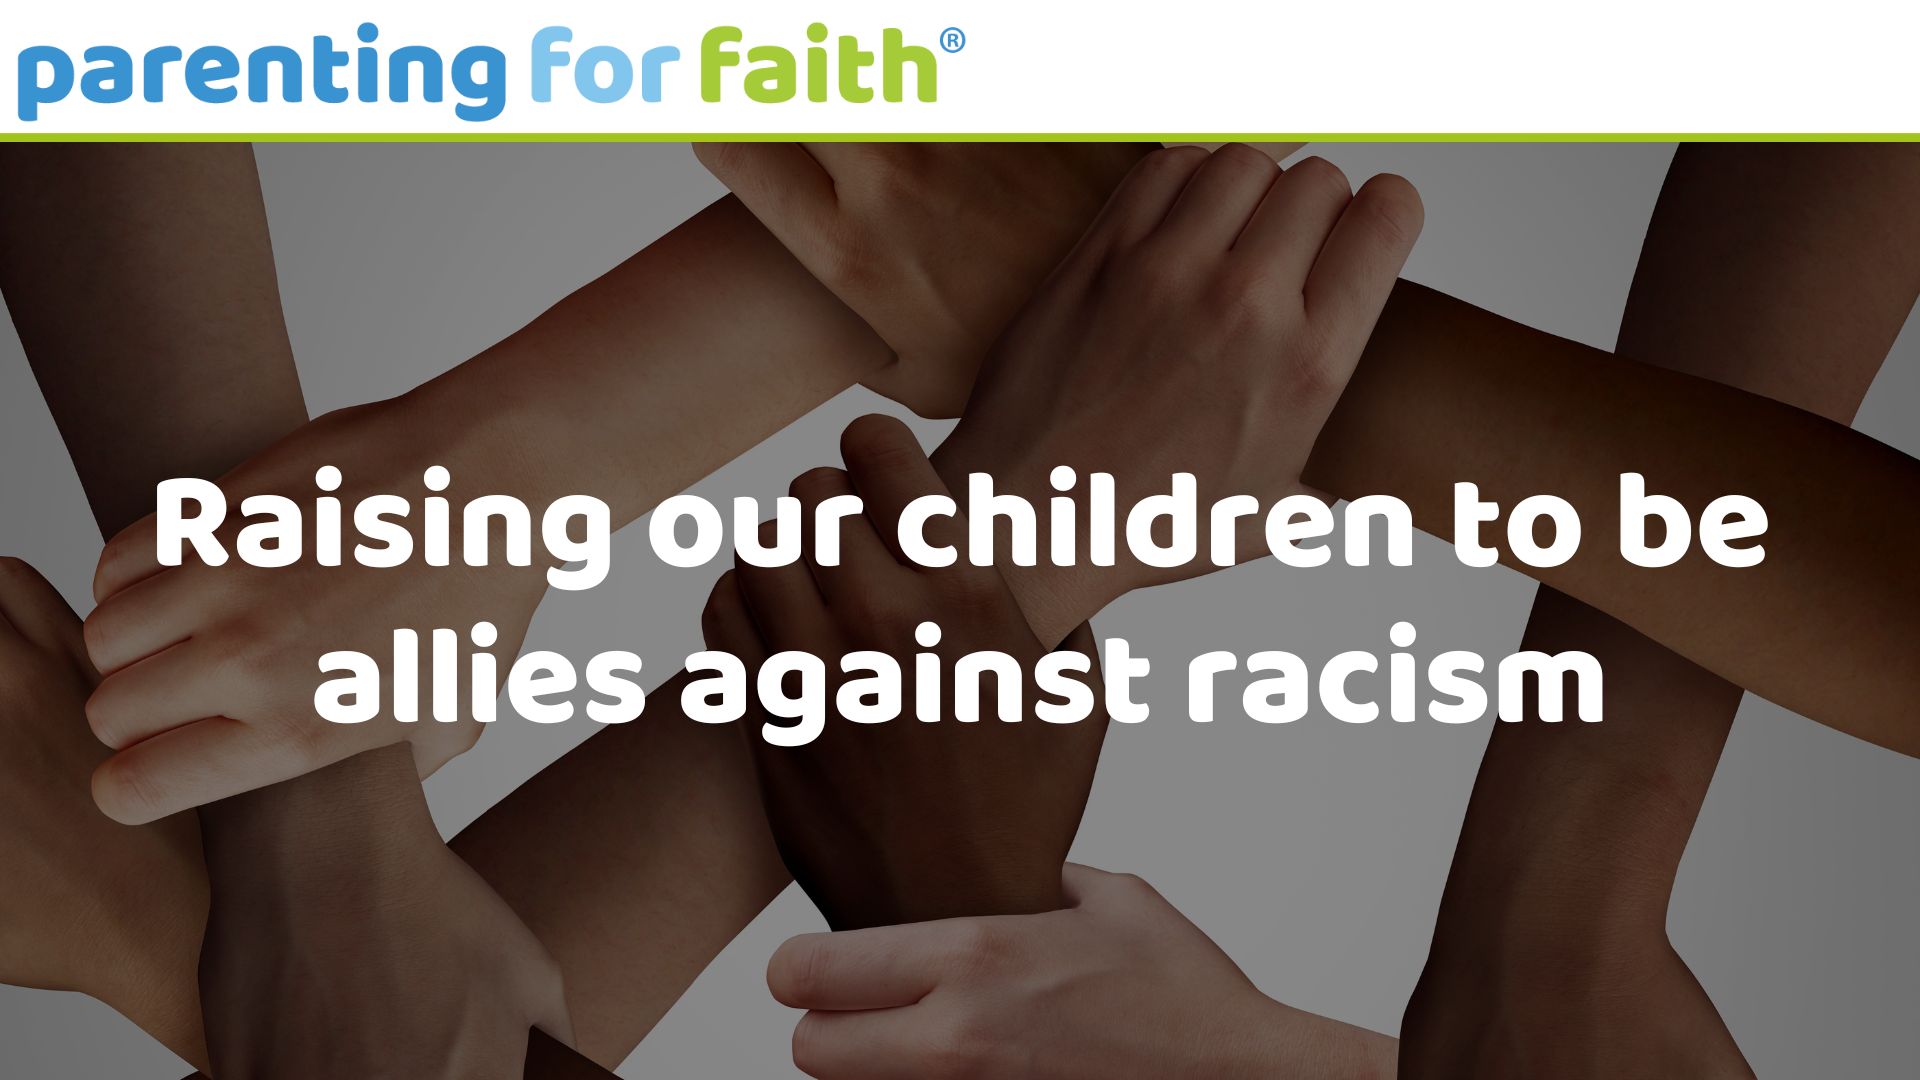 Raising our children to be allies against racism image credit wildpixel from Getty Images